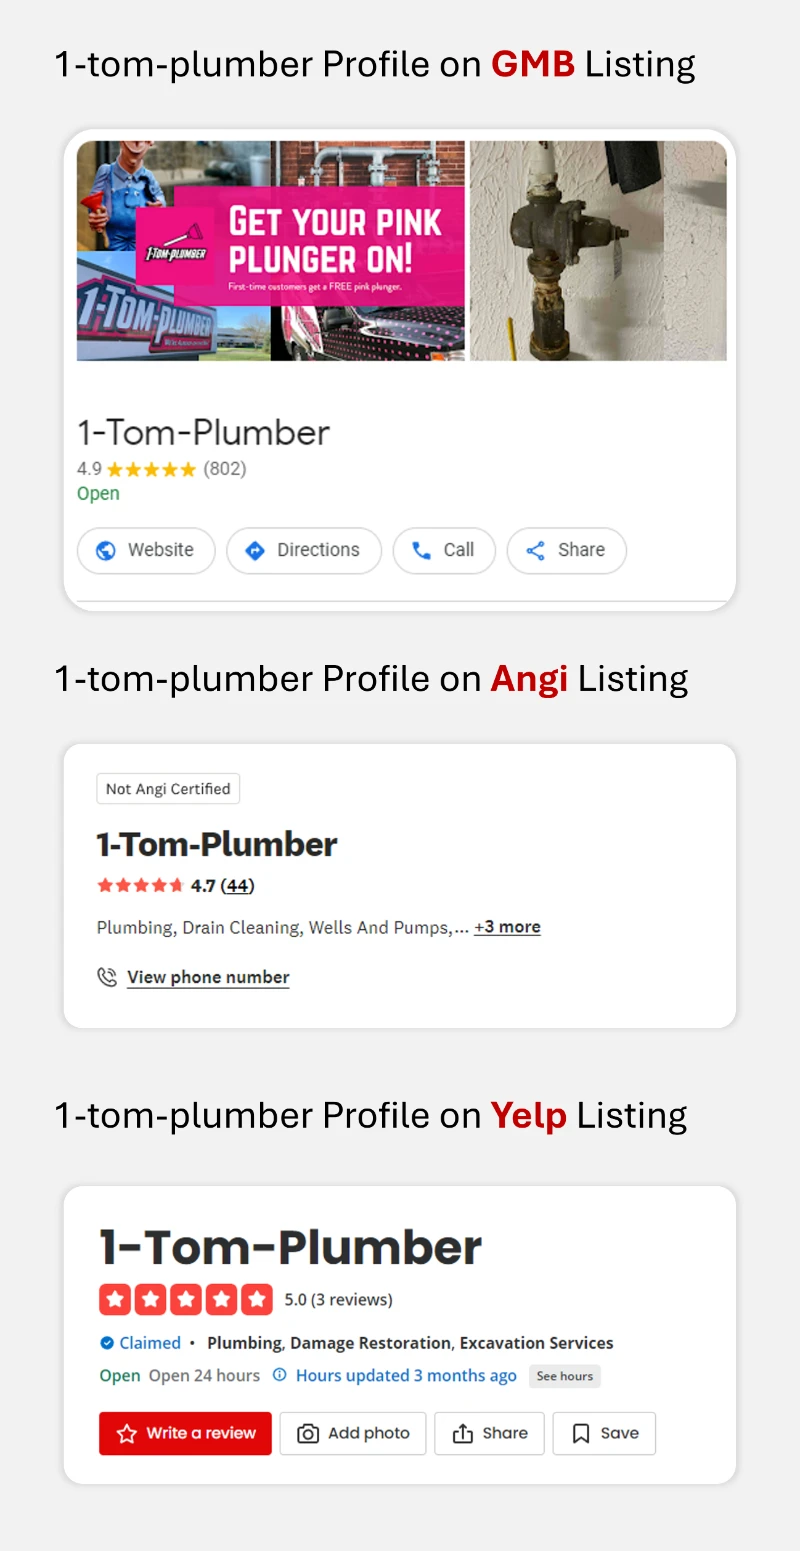 Reputation of 1-tom-plumber on Trusted Sites